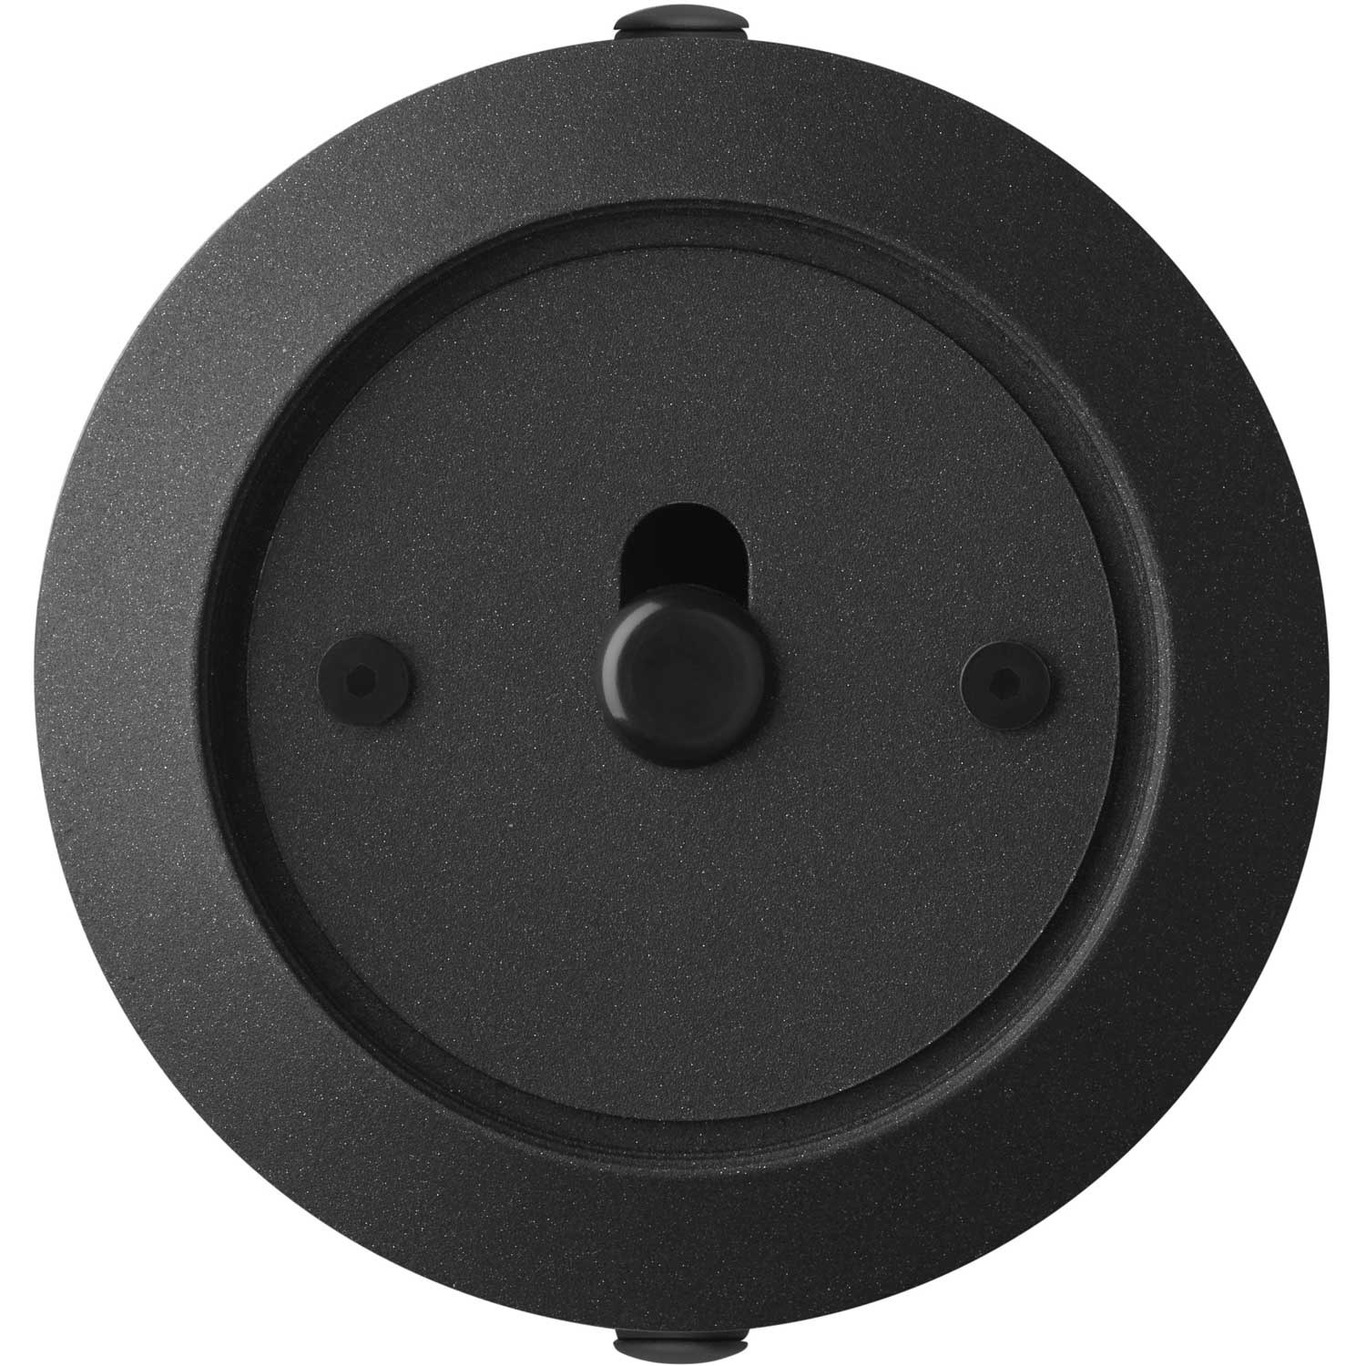 895 Adapter Wall-mounted For Lamp / Wall Spot, Black